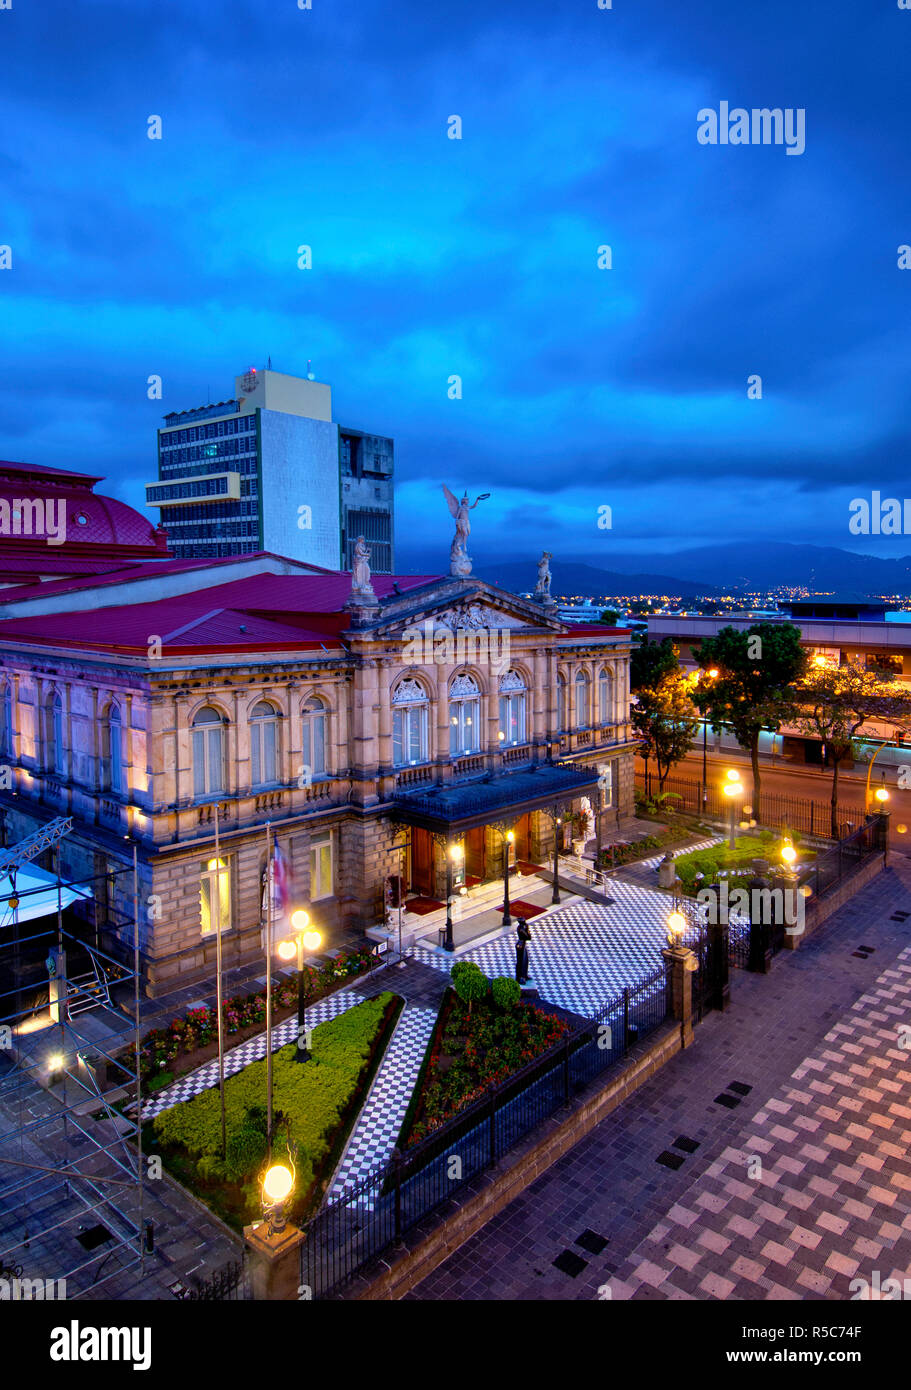 Costa Rica, San Jose, The National Theater, Built In 1897, Finest Historical Building In San Jose, Based On The Architecutre Of The Paris Opera House, The Plaza of Culture, Dawn Stock Photo